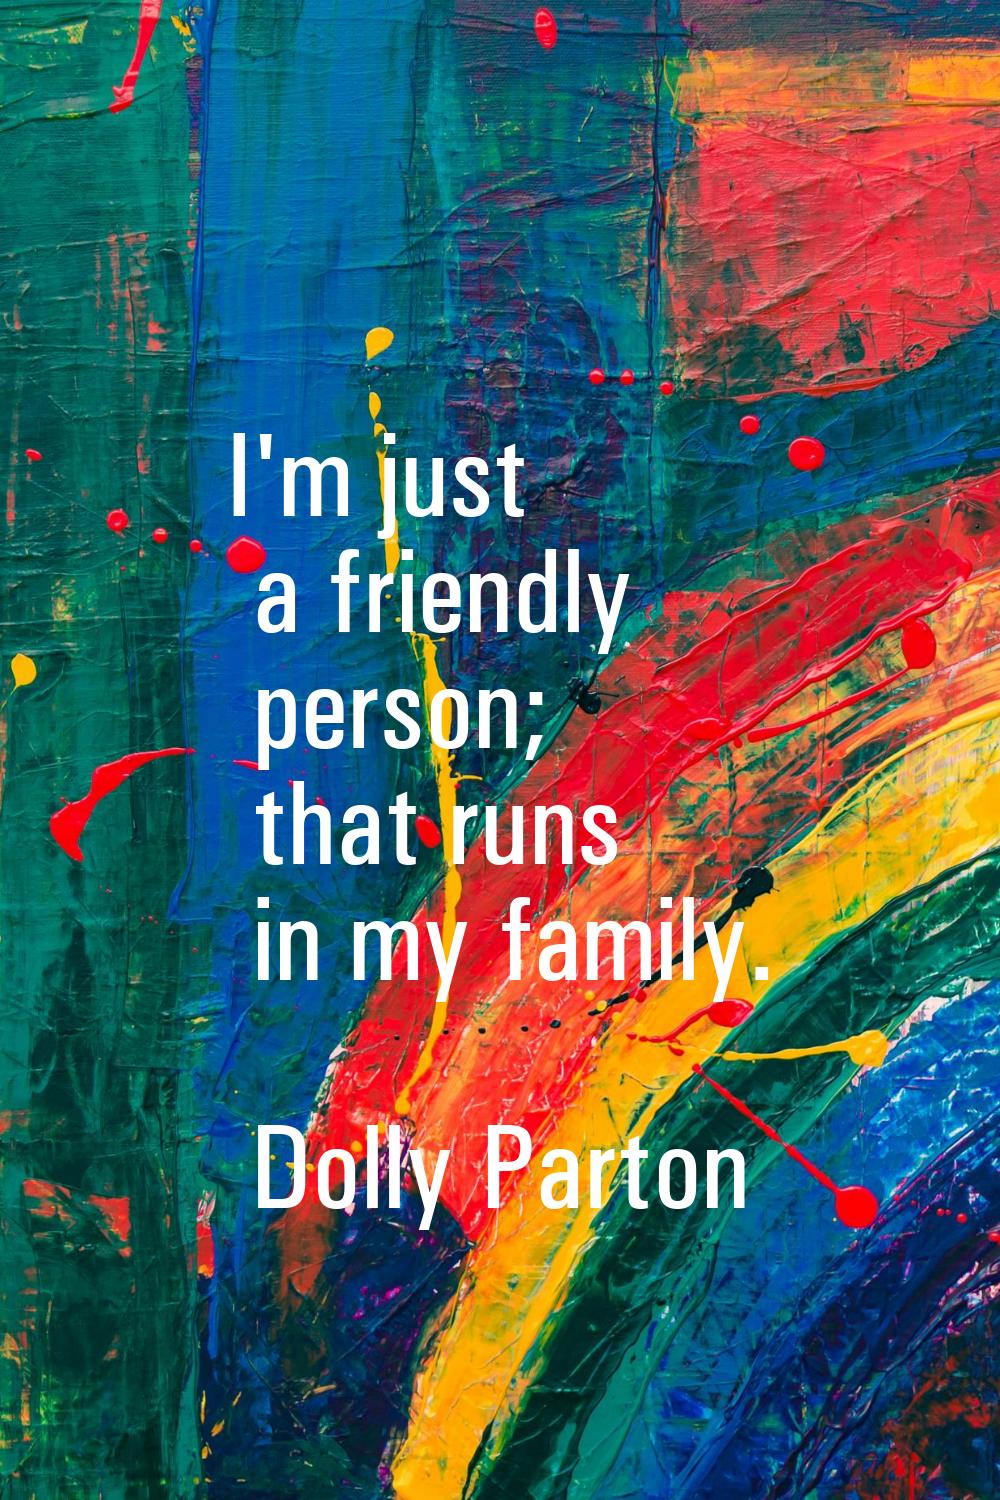 I'm just a friendly person; that runs in my family.